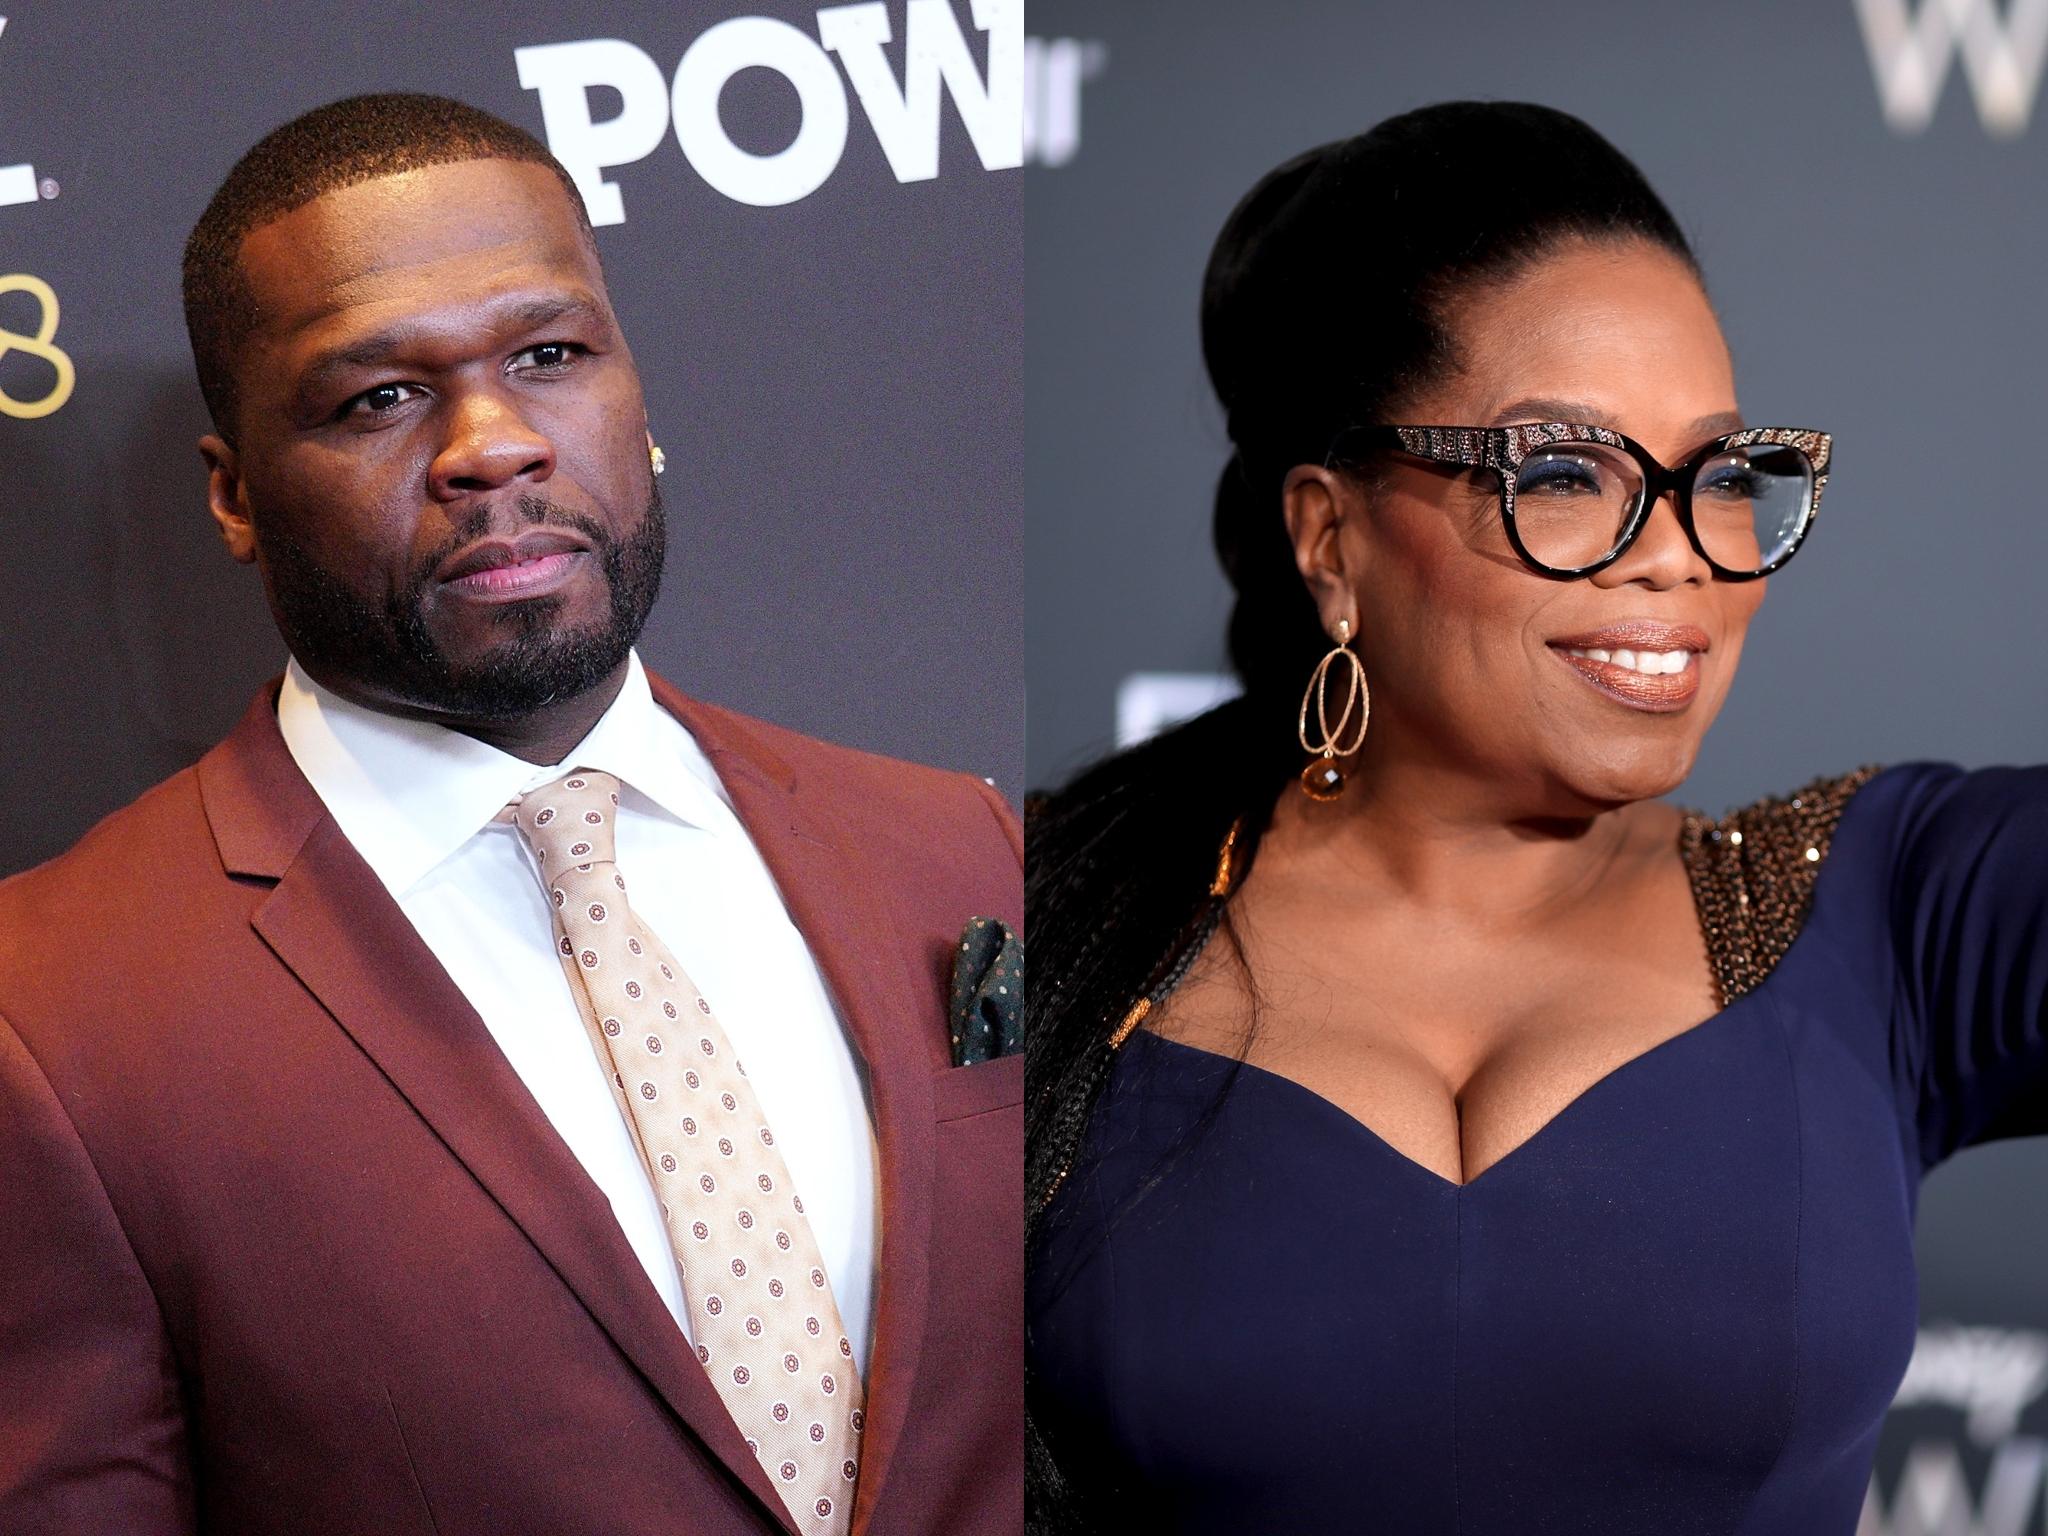 50 Cent accuses Oprah of only 'going after black men' in #MeToo cases